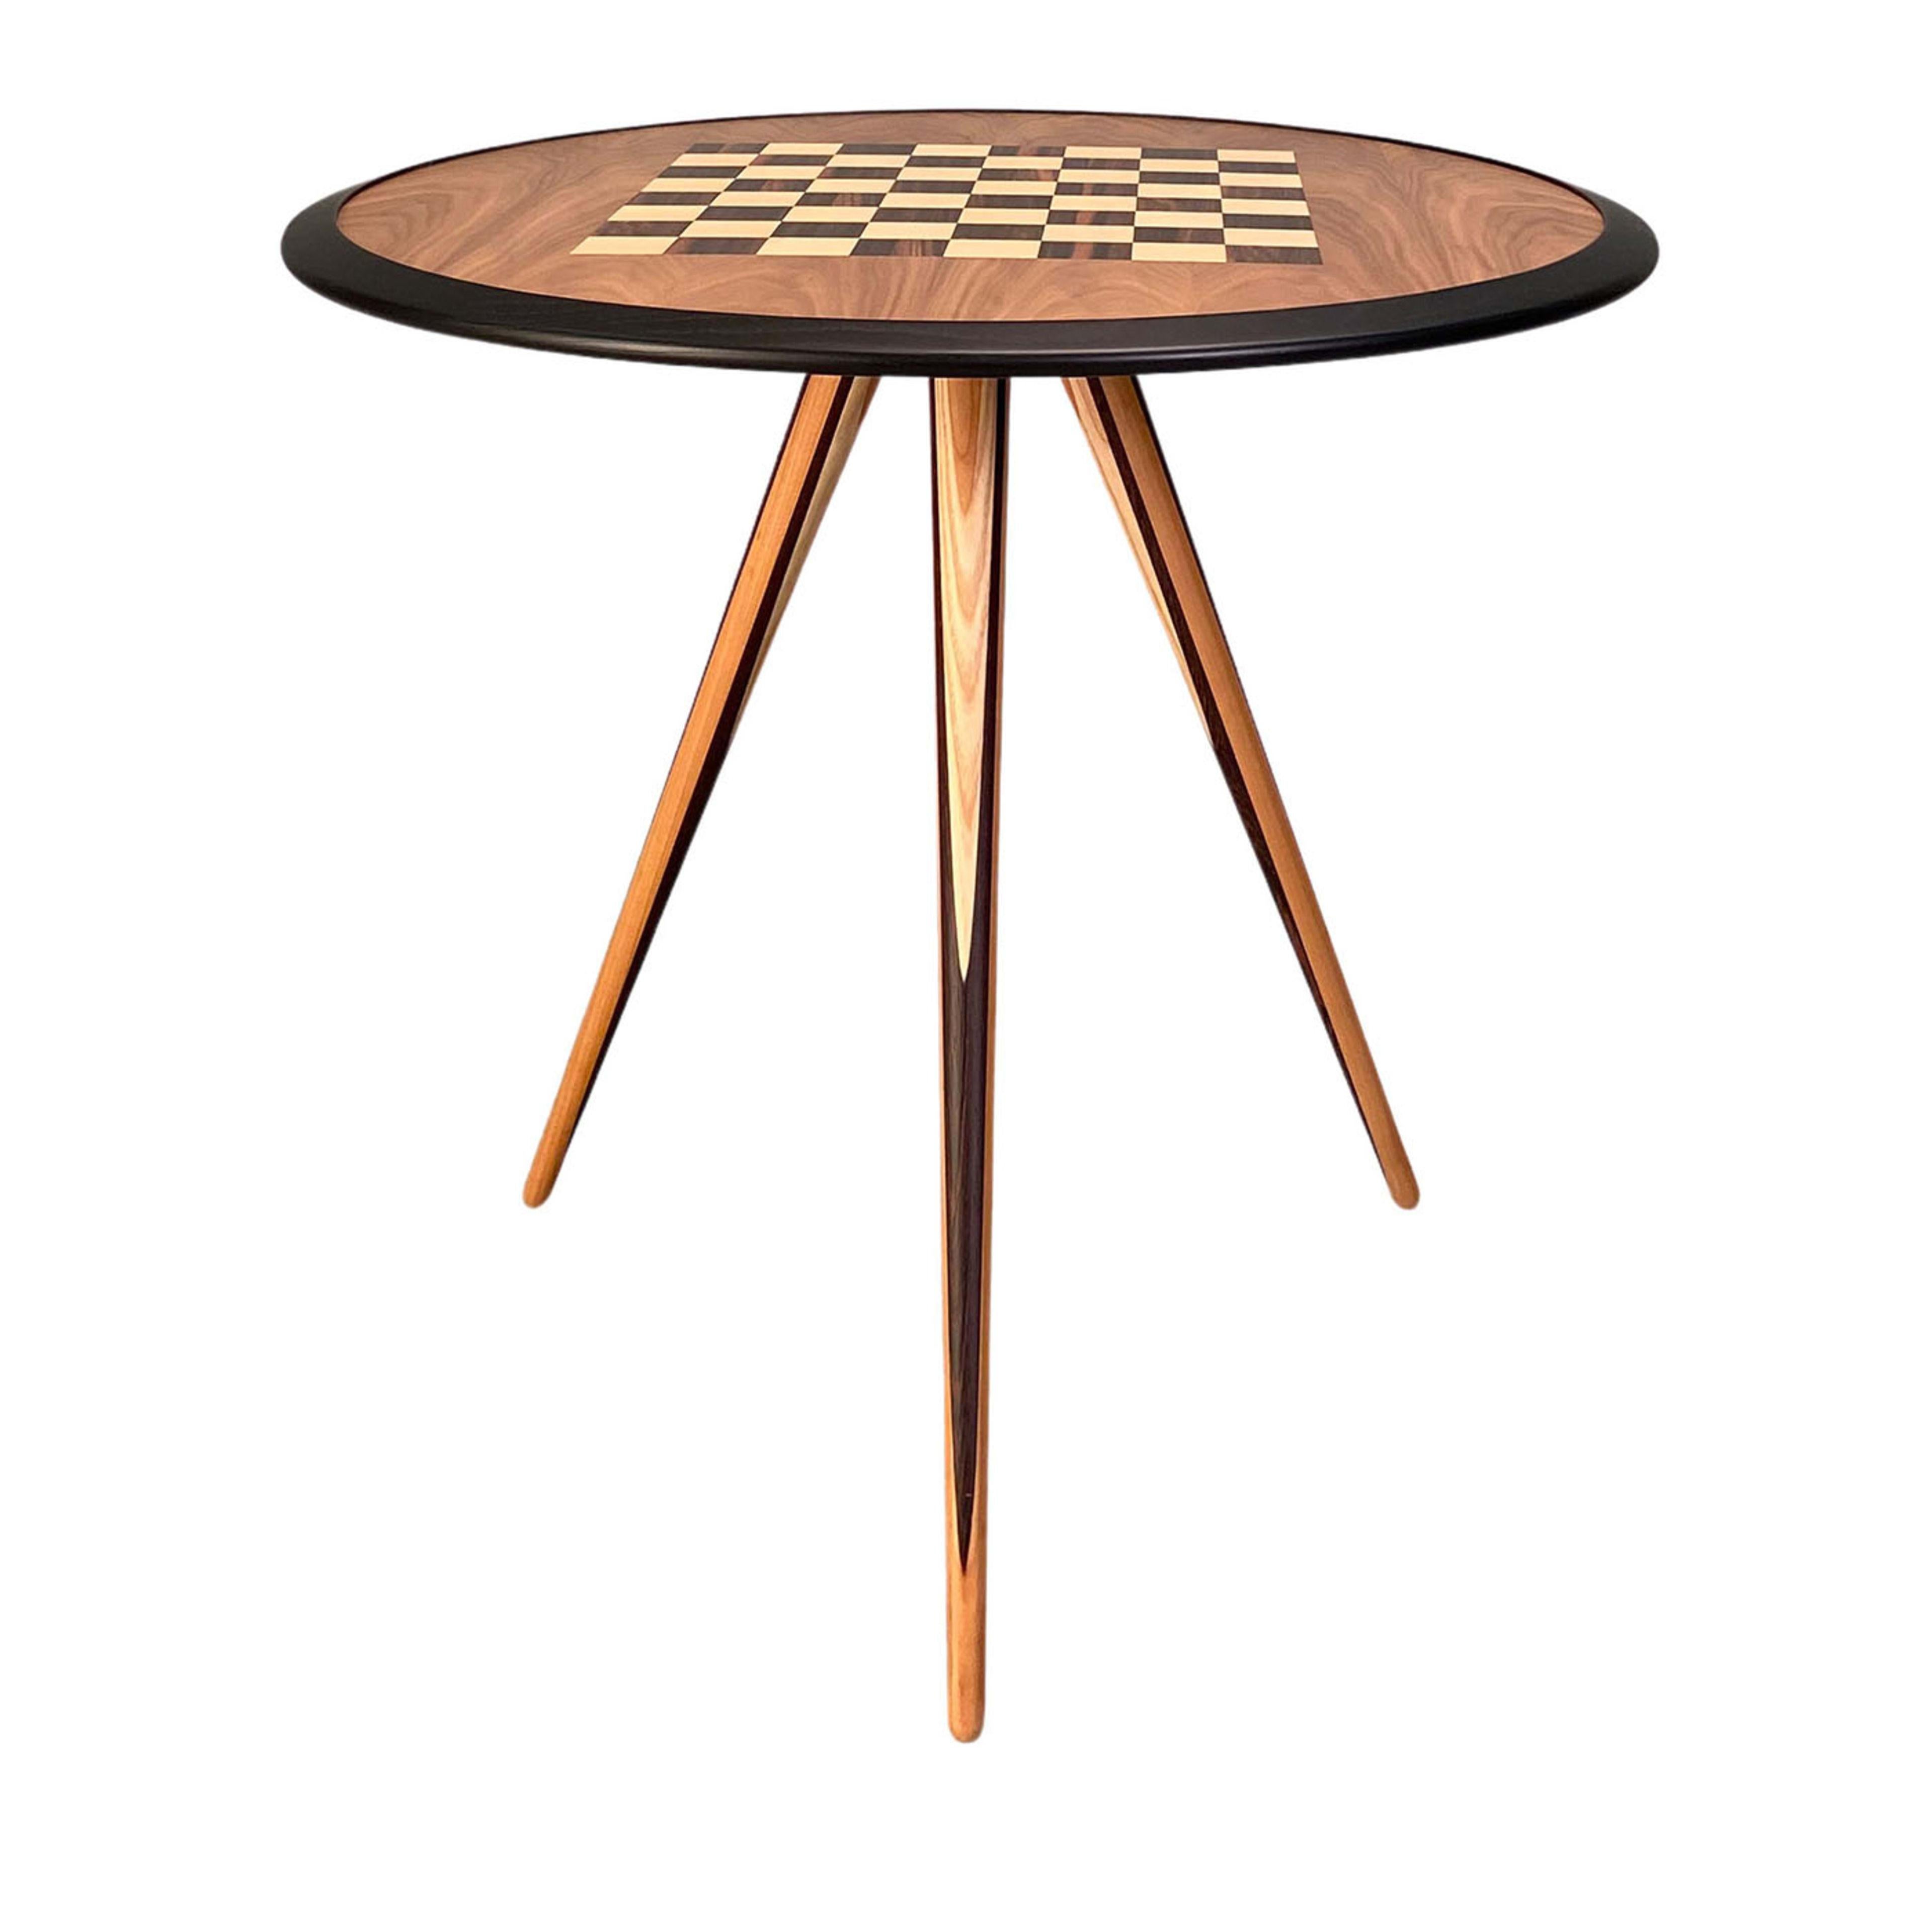 Imbued with utmost refinement, this stupendous side table is a deft display of traditional craftsmanship. Its round top is handmade of ash wood lacquered in an ebony shade, enriched with walnut, maple, and Makassar ebony inlay work of a chessboard.